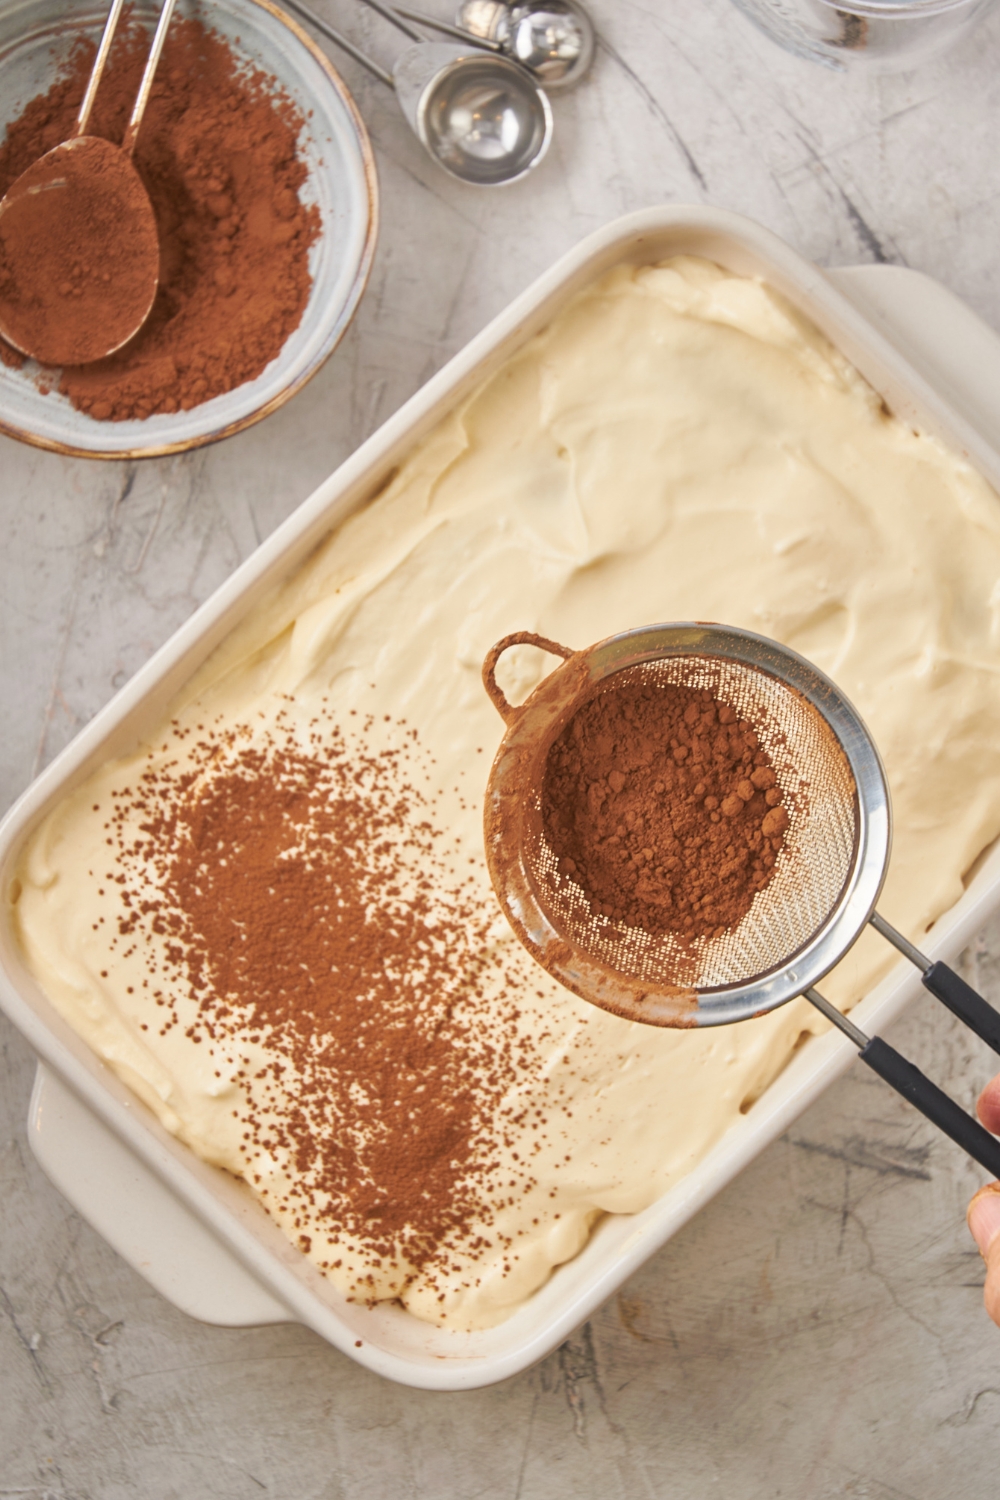 A pan with tiramisu, a sieve is sprinkling cocoa powder on top.